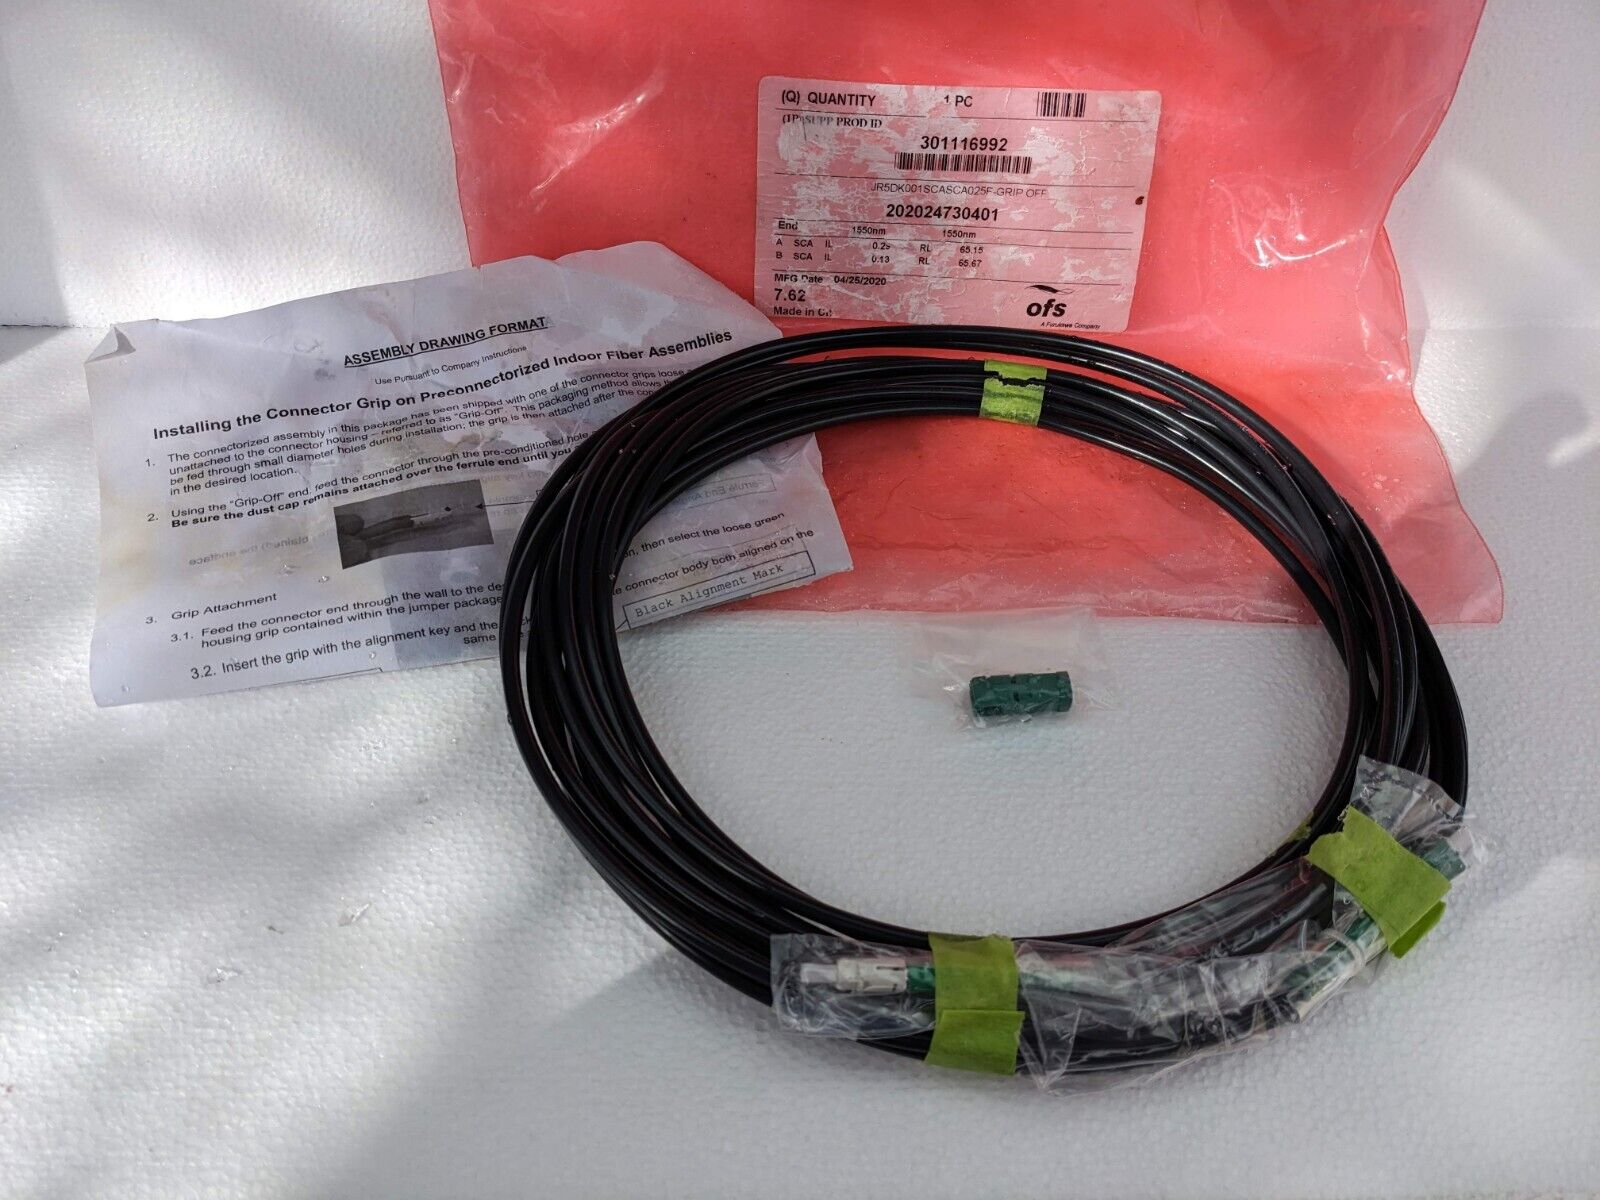 25Ft OFS Indoor Preconnectorized Indoor Fiber Optic Cable JR5DW001SCASCA025F